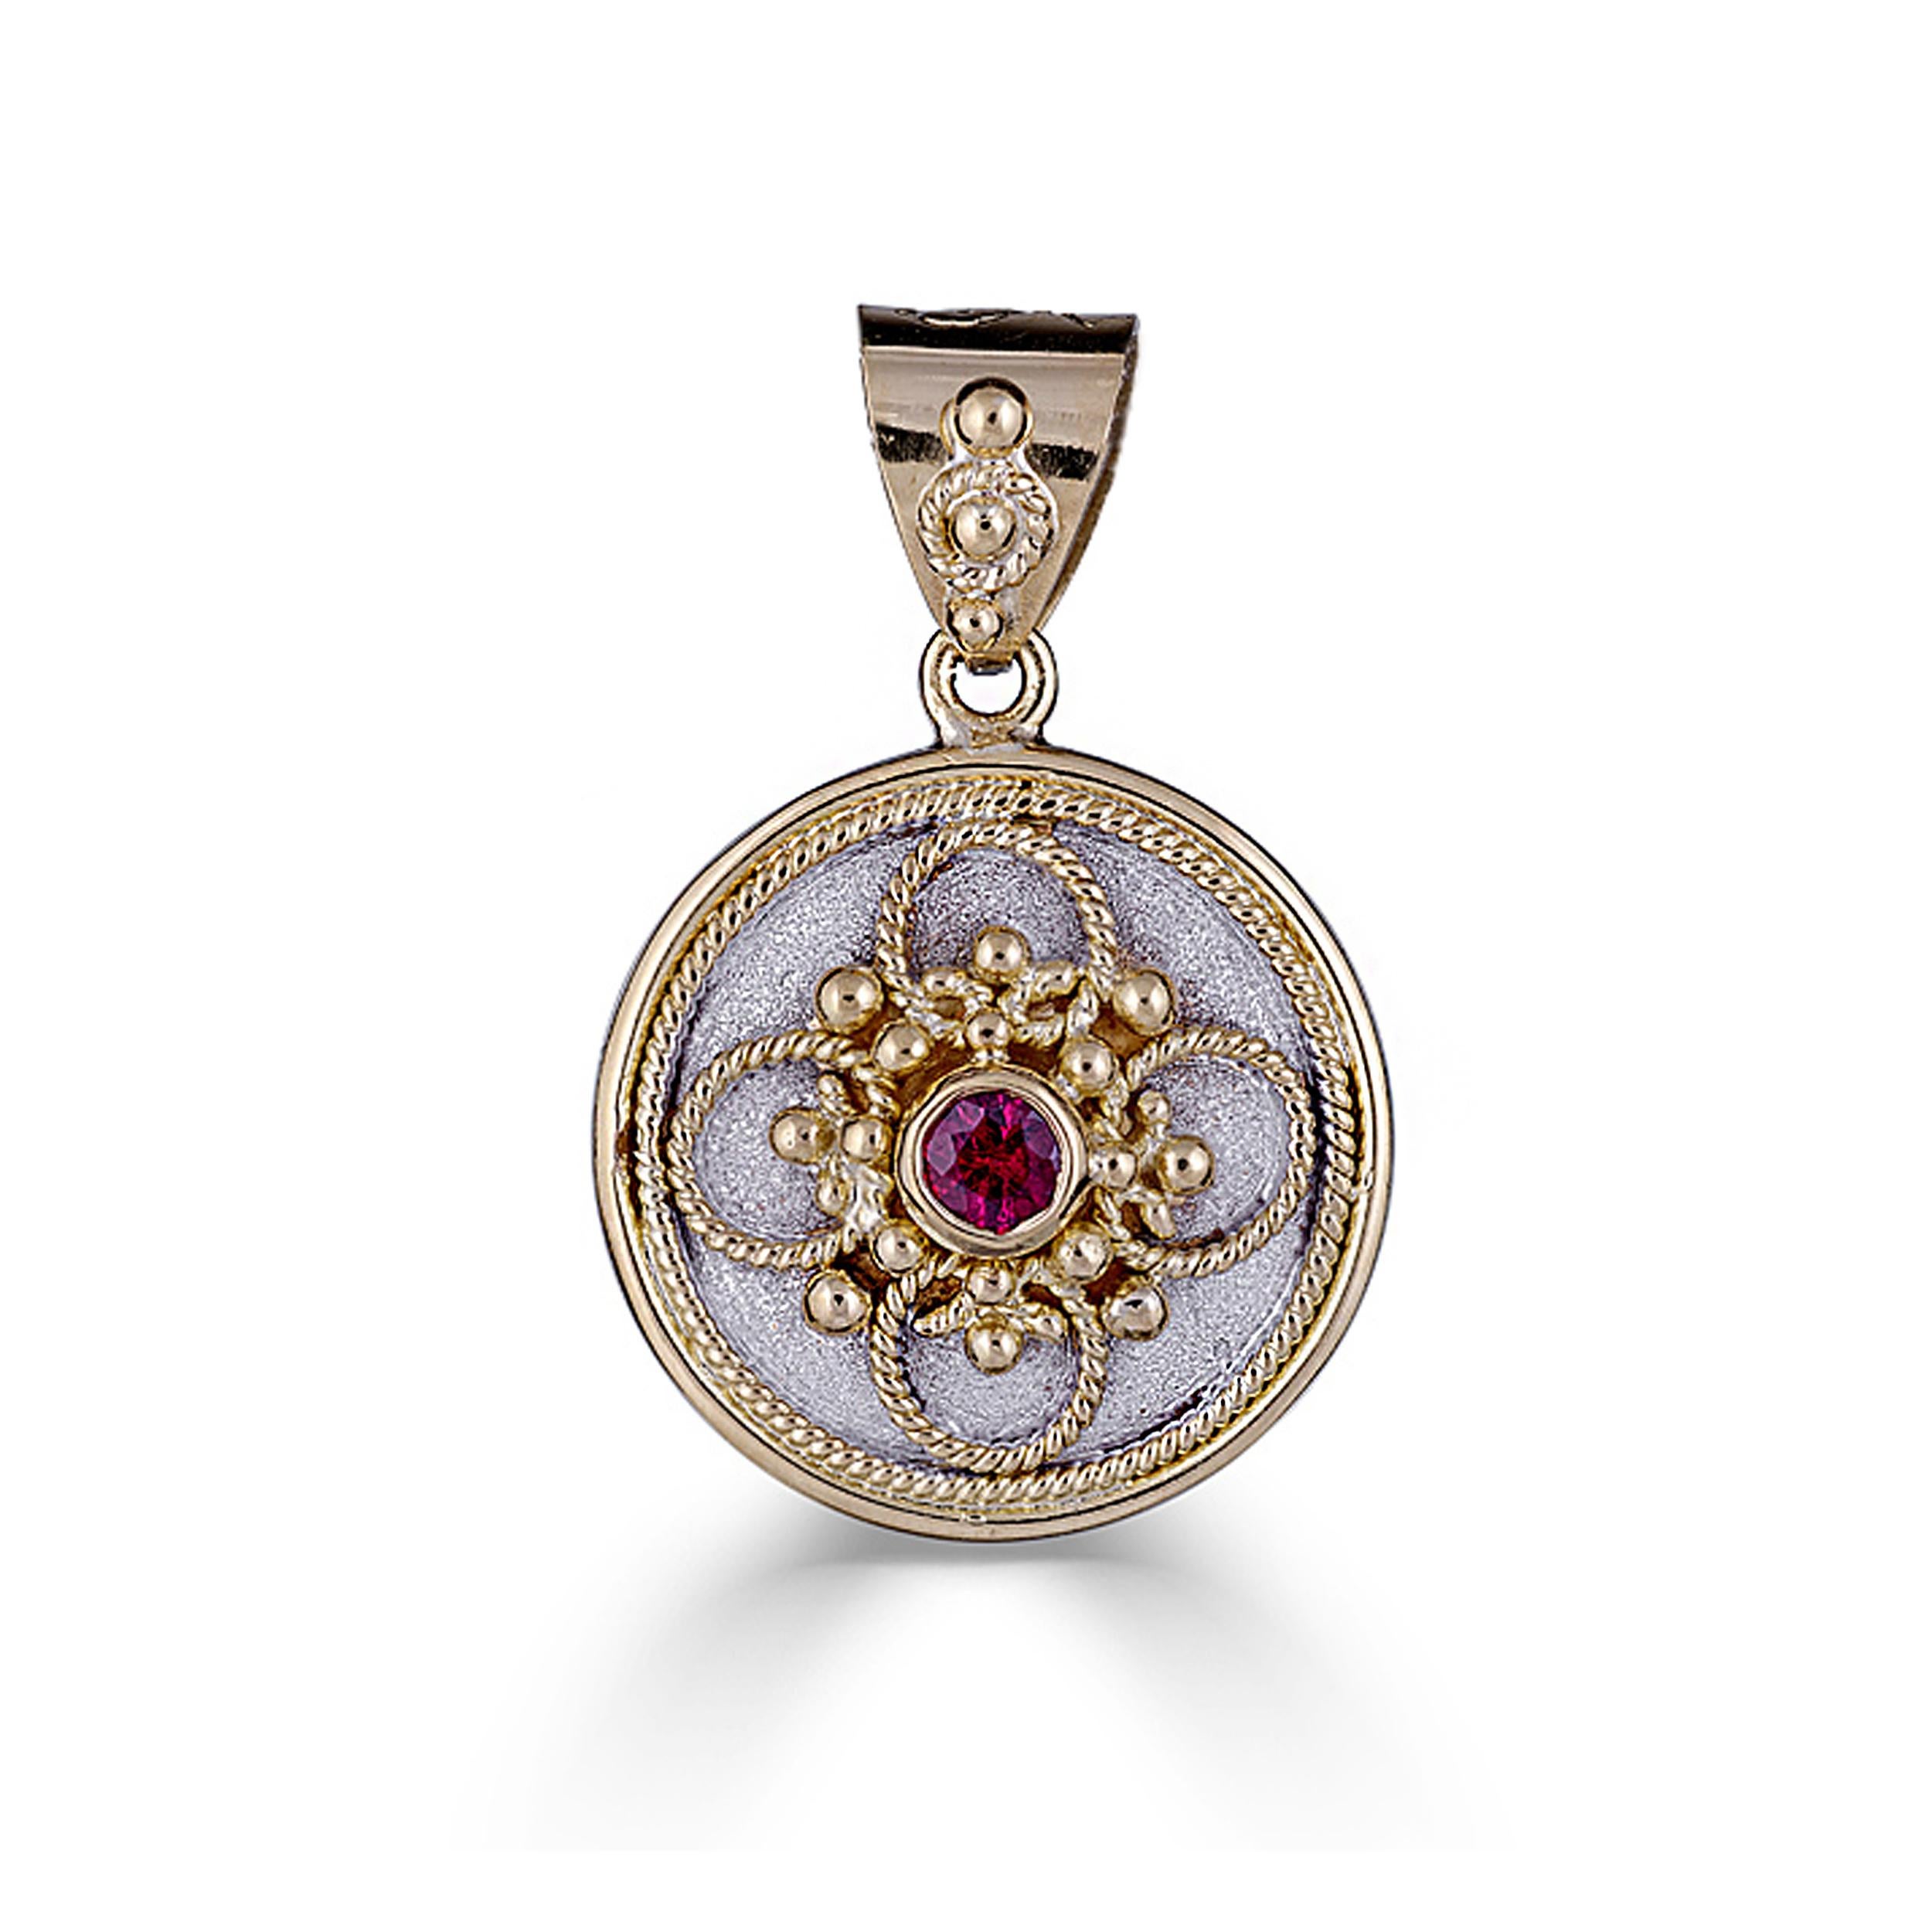 S.Georgios designer pendant all handmade solid 18 Karat Yellow Gold. This pendant is microscopically decorated - and has granulation work all the way around with gold beads and wires shaped as the last letter of the Greek Alphabet - Omega, which